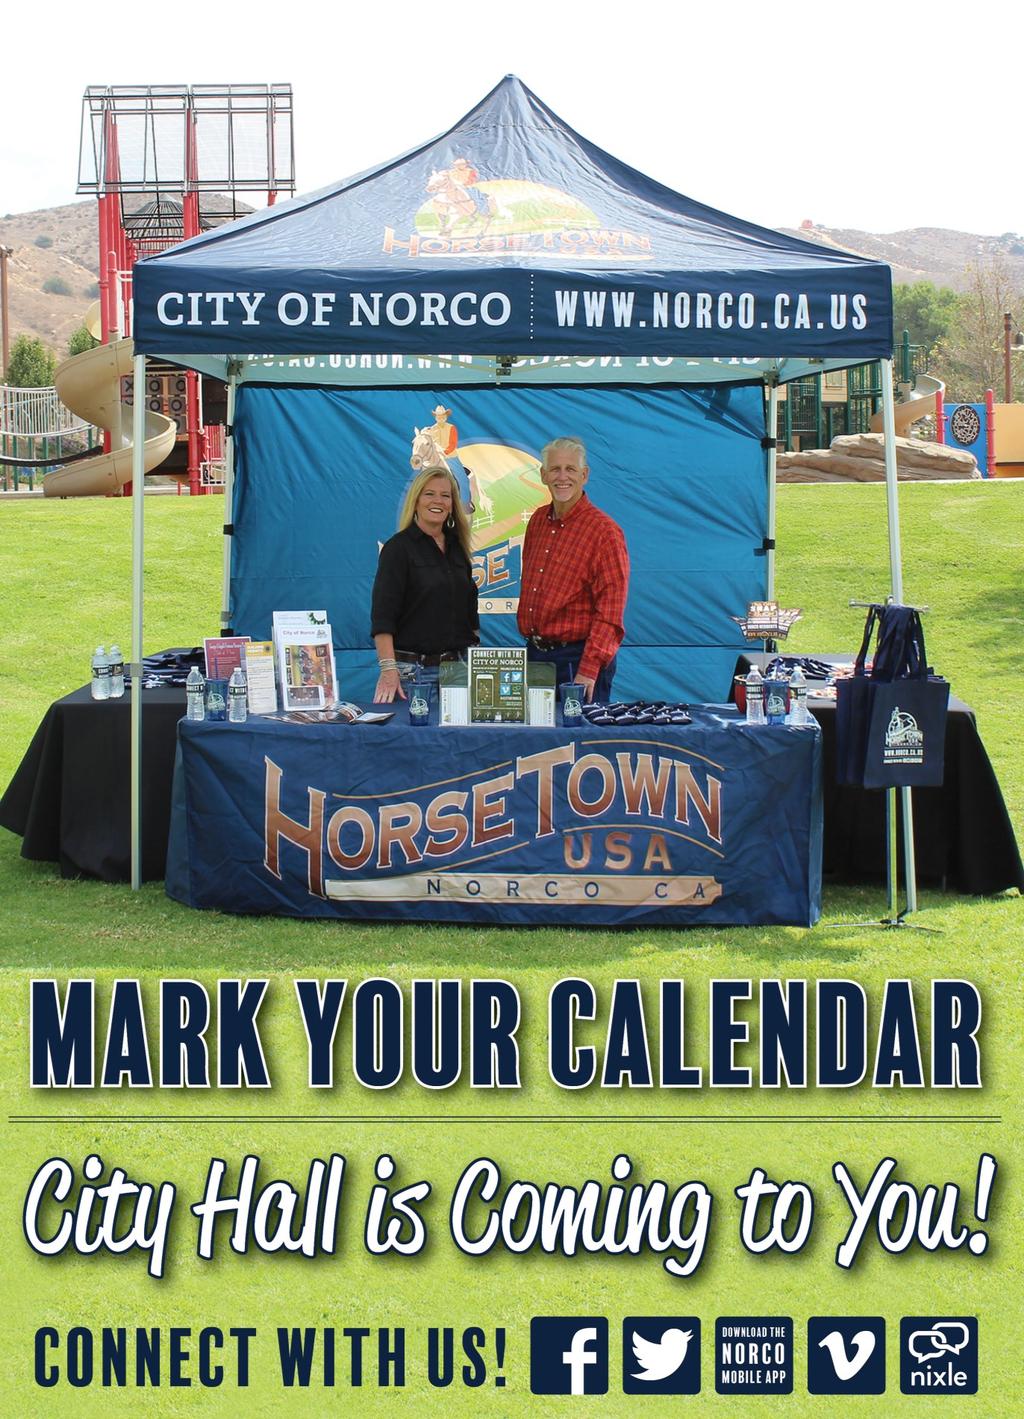 Join us to engage in community conversations, receive official City updates, pick up informational materials, ask questions of City staff, win fun giveaways and enter Horsetown USA raffles!